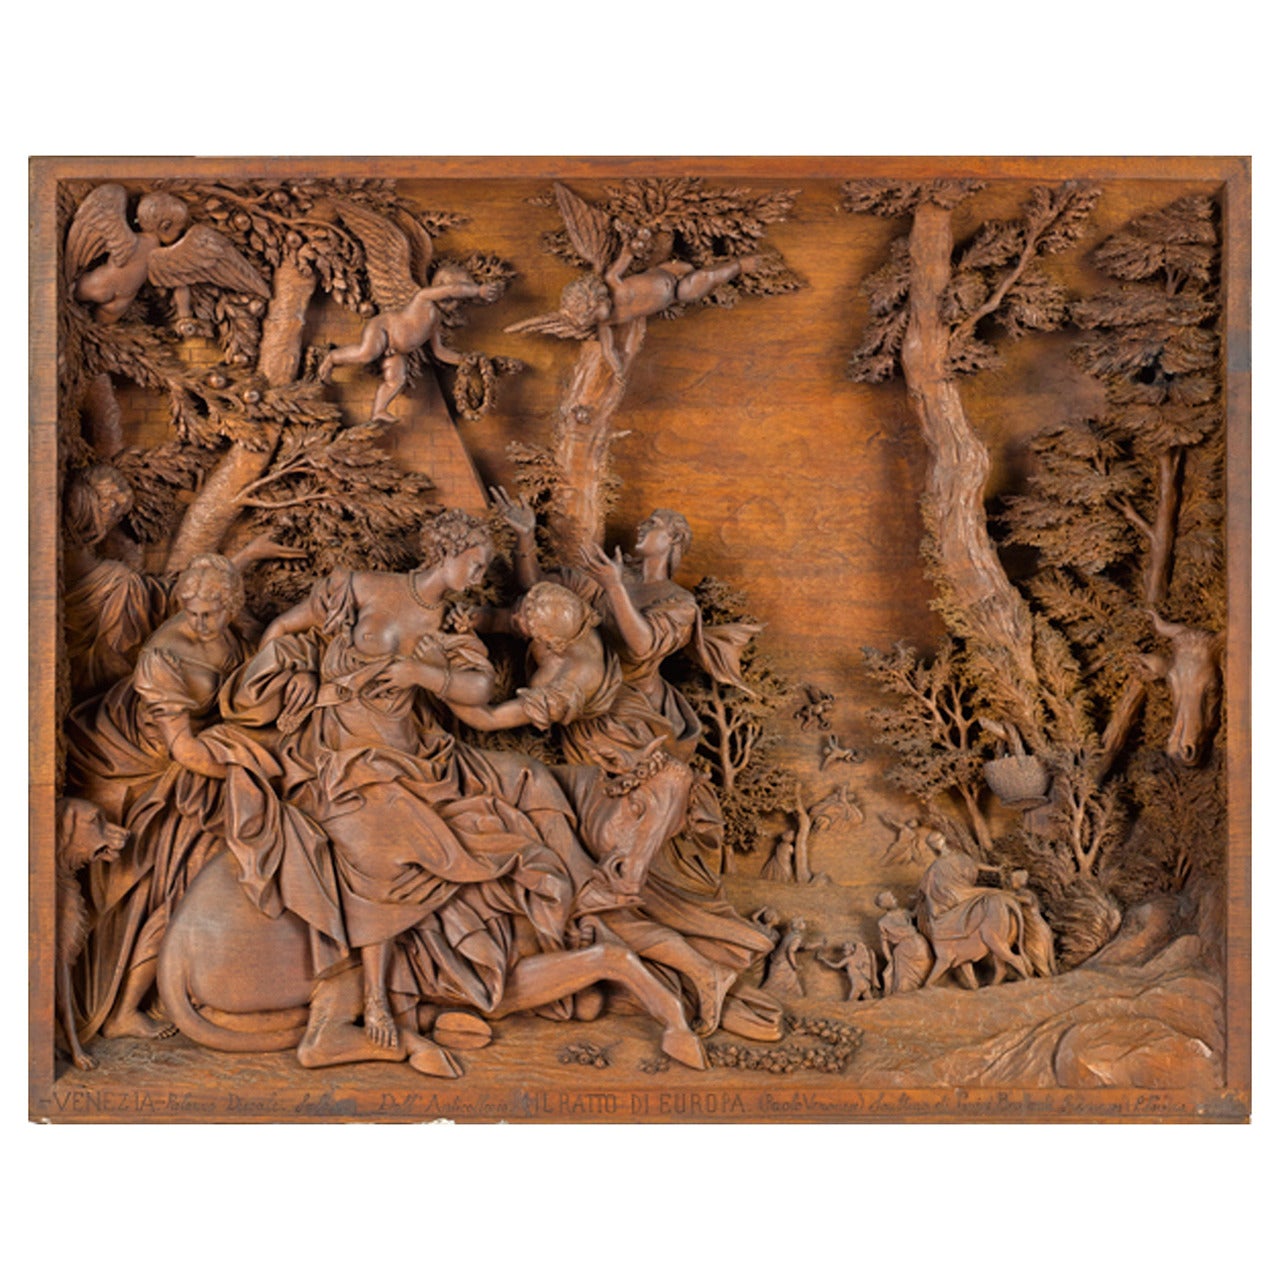 Virtuosic Full-Relief Mahogany Sculpture of "The Abduction of Europa"